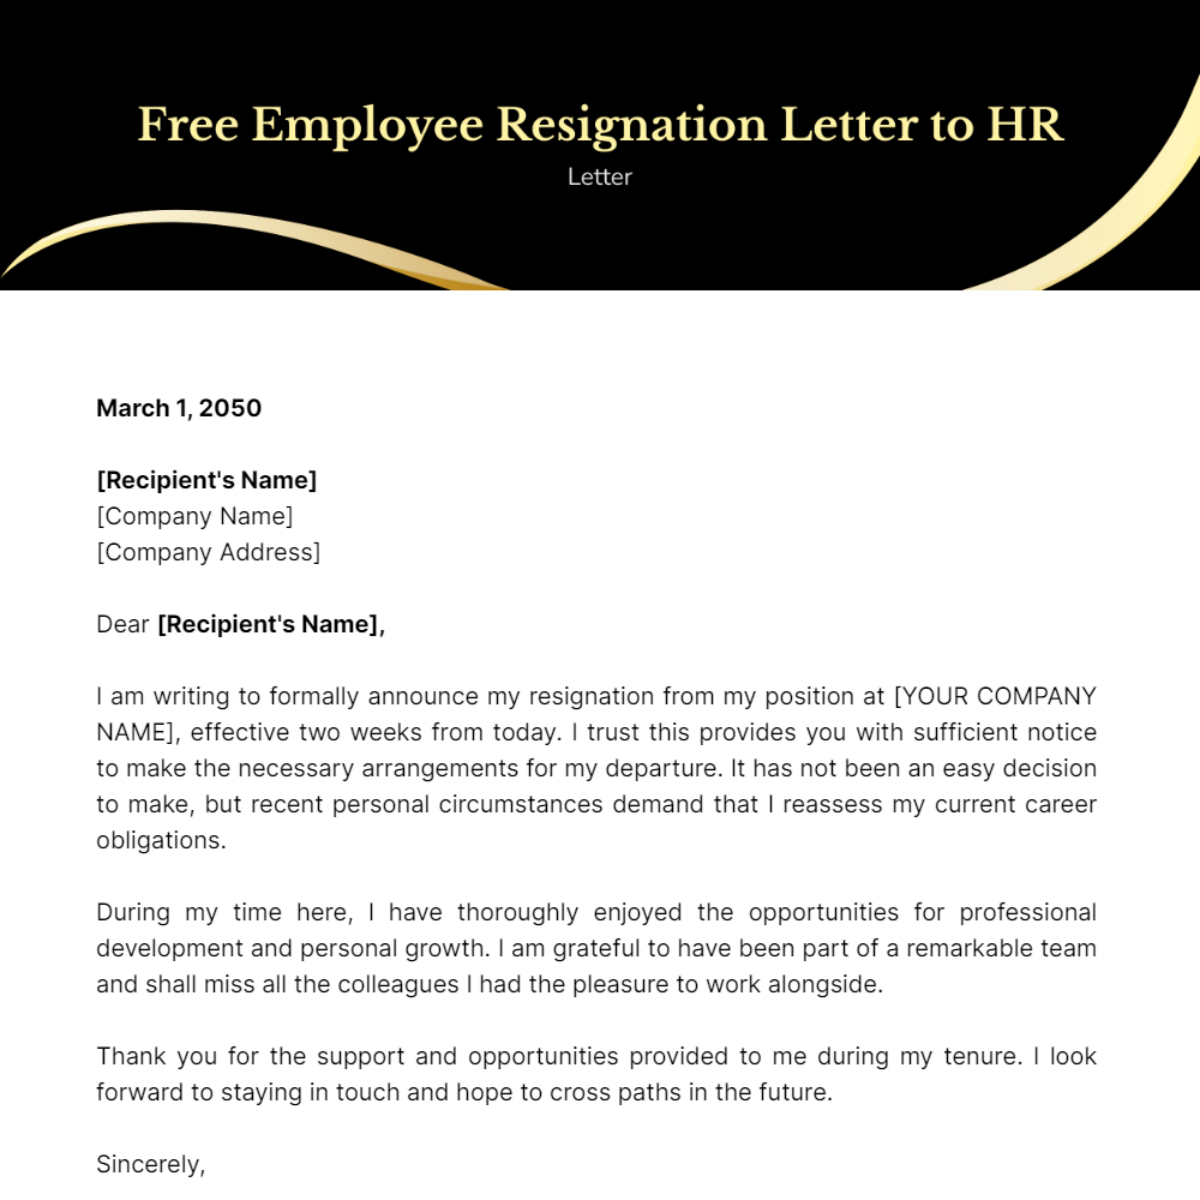 Employee Resignation Letter to HR Template